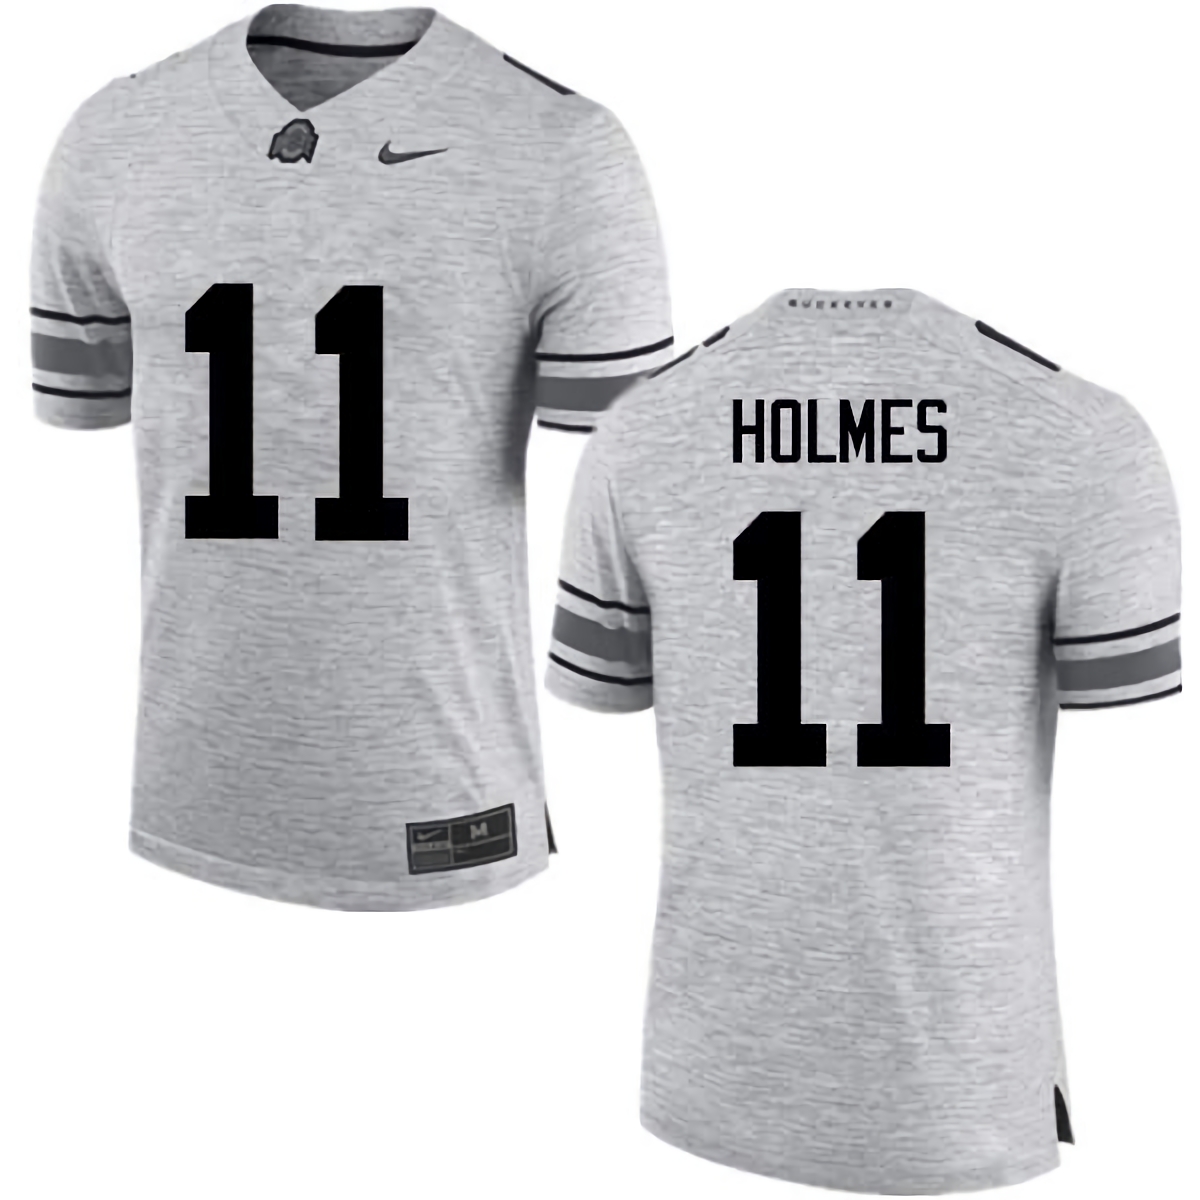 Jalyn Holmes Ohio State Buckeyes Men's NCAA #11 Nike Gray College Stitched Football Jersey UAU7156YM